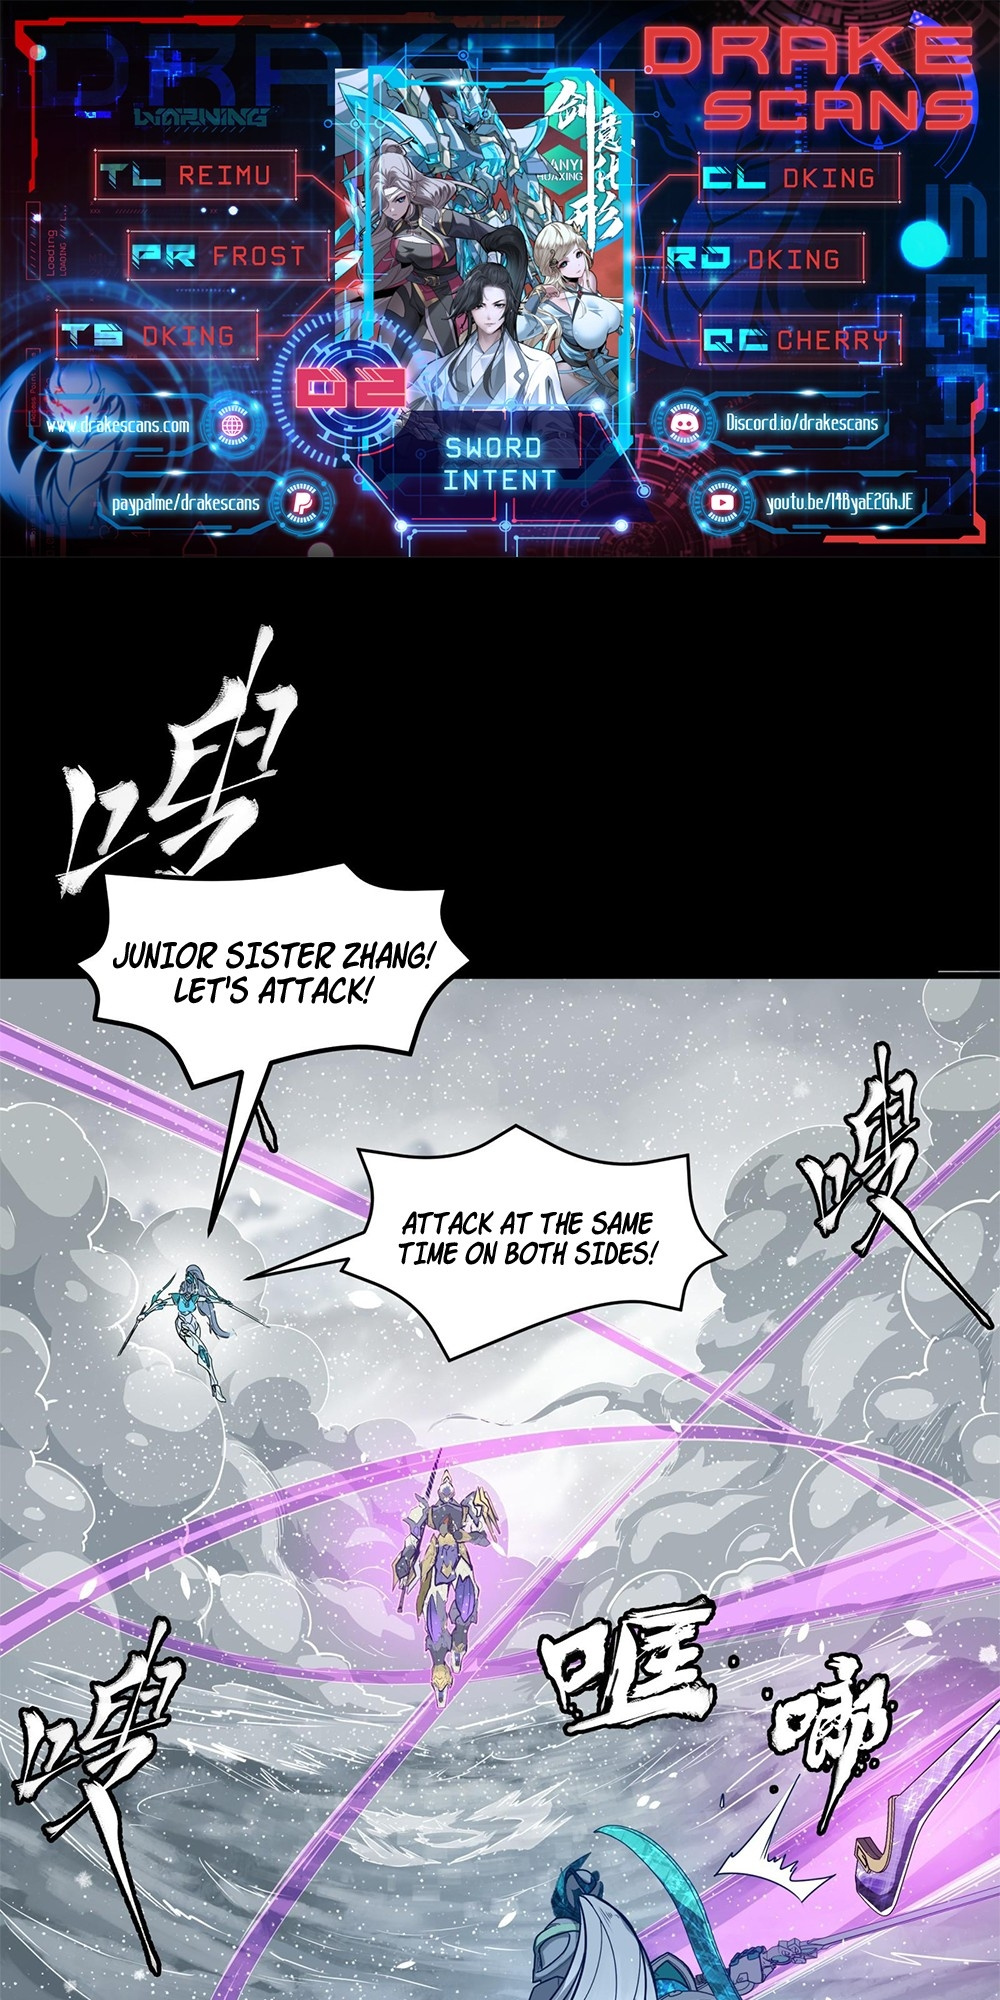 Sword Intent - Page 1